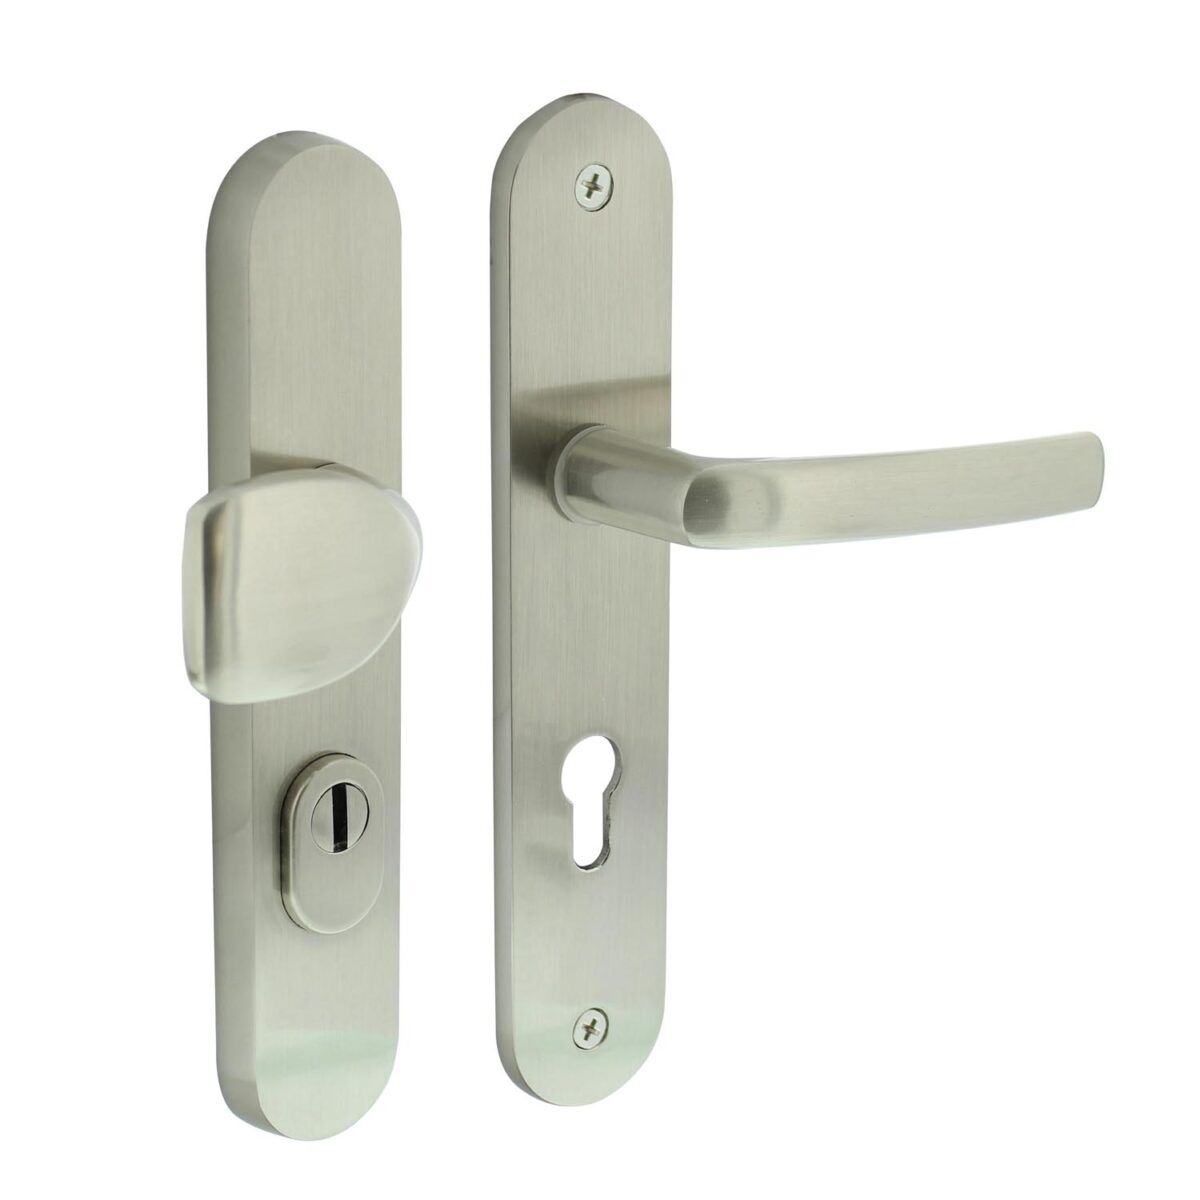 security fitting with core pull protection. Nickel matt intersteel security fitting